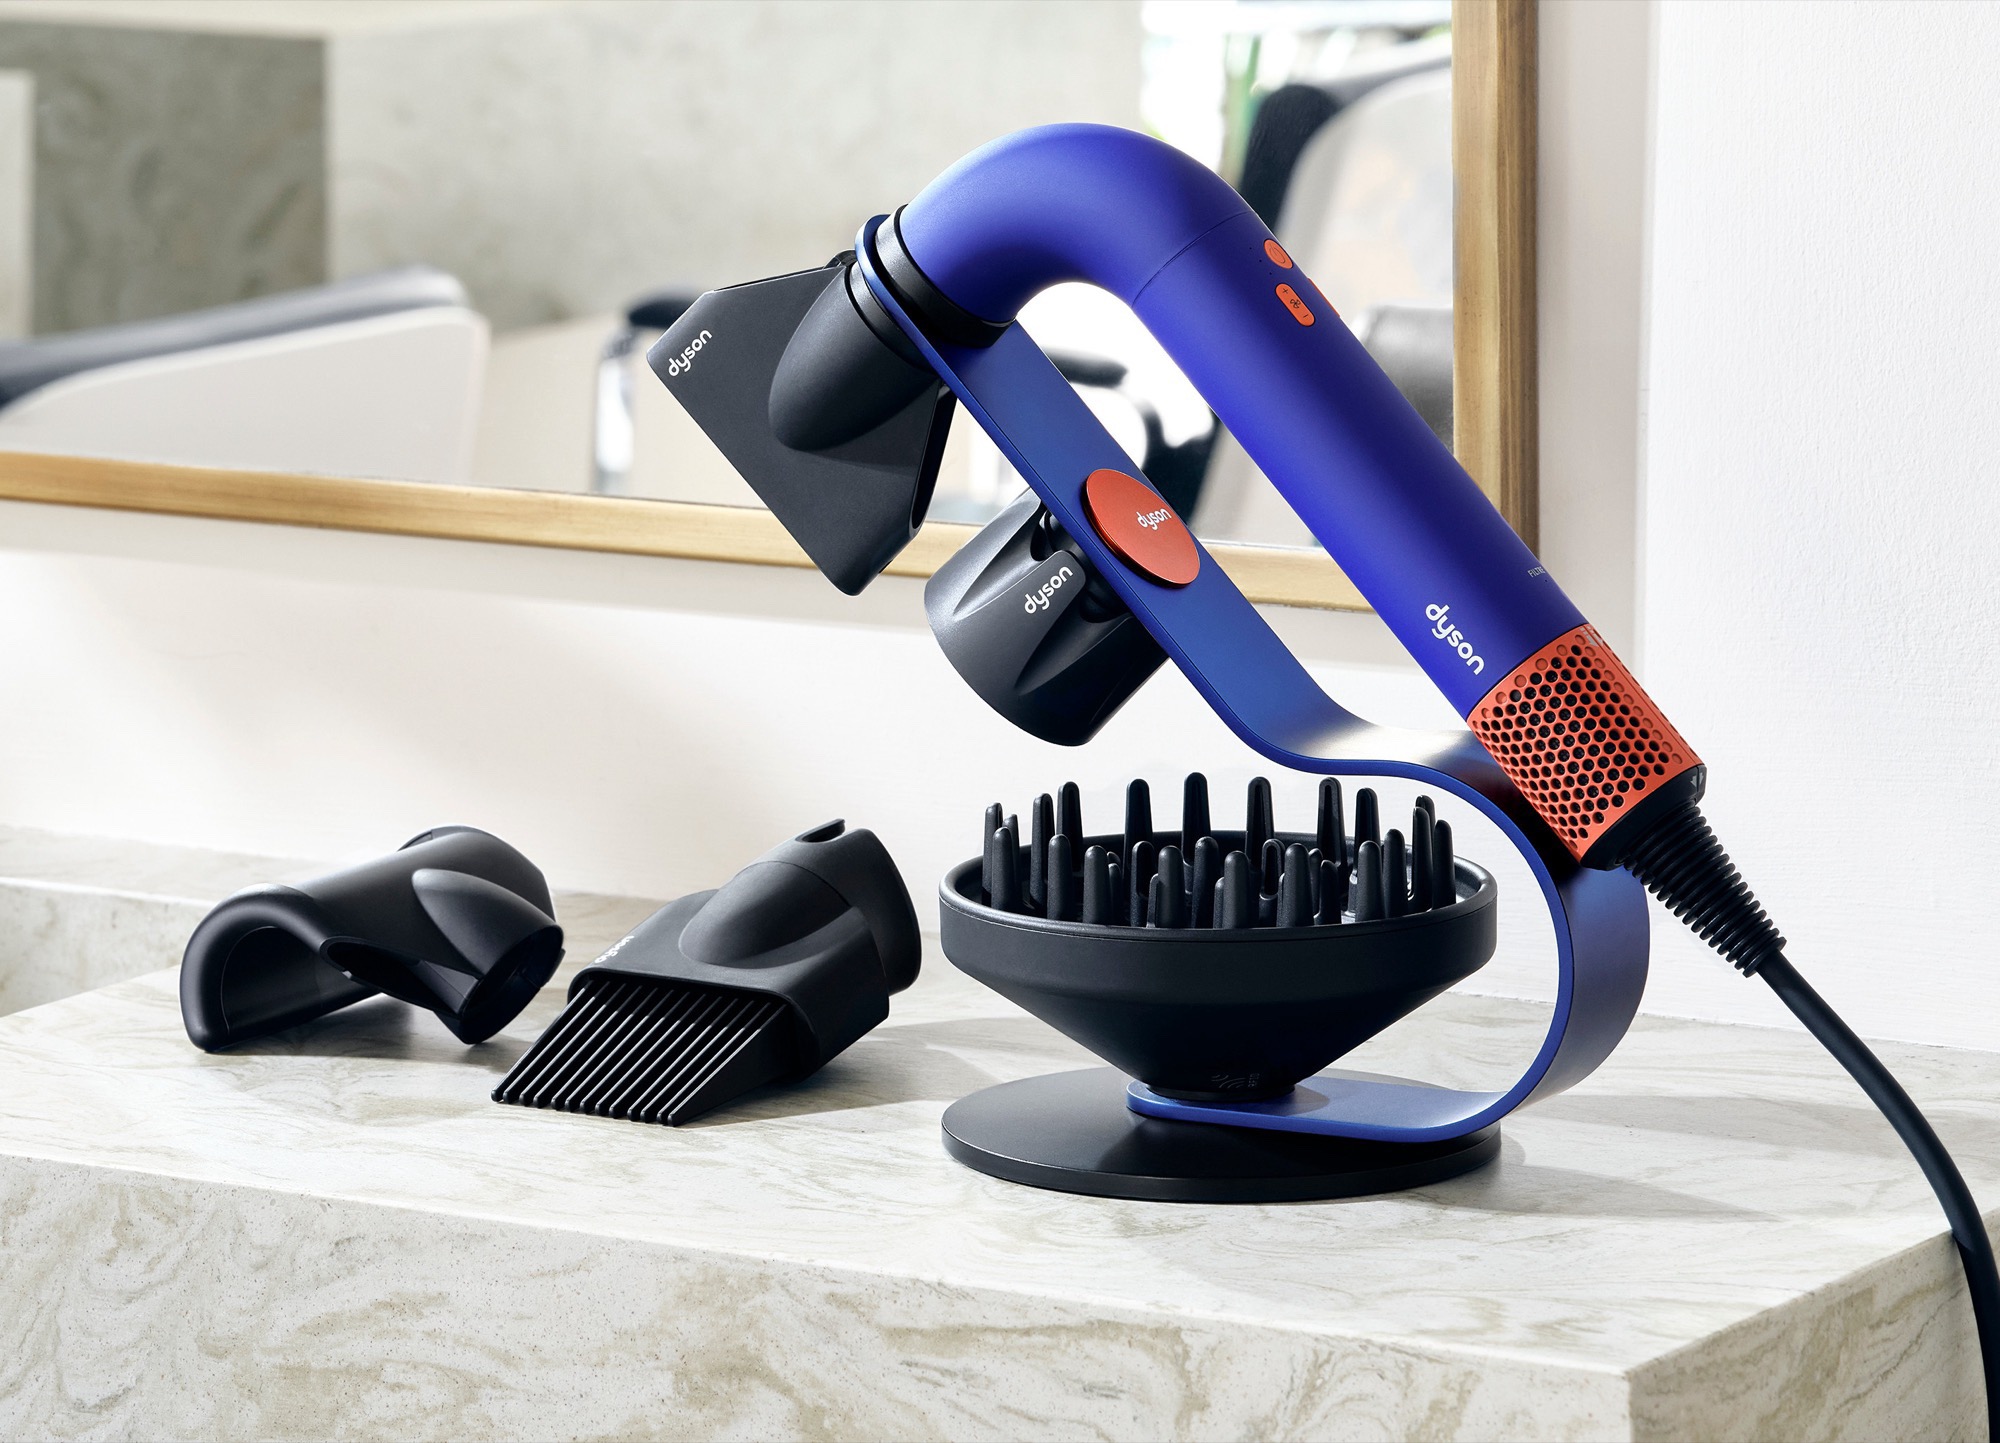 Dyson’s Supersonic Hair Dryer Evolution: Now Equipped with New Heating Element Technology